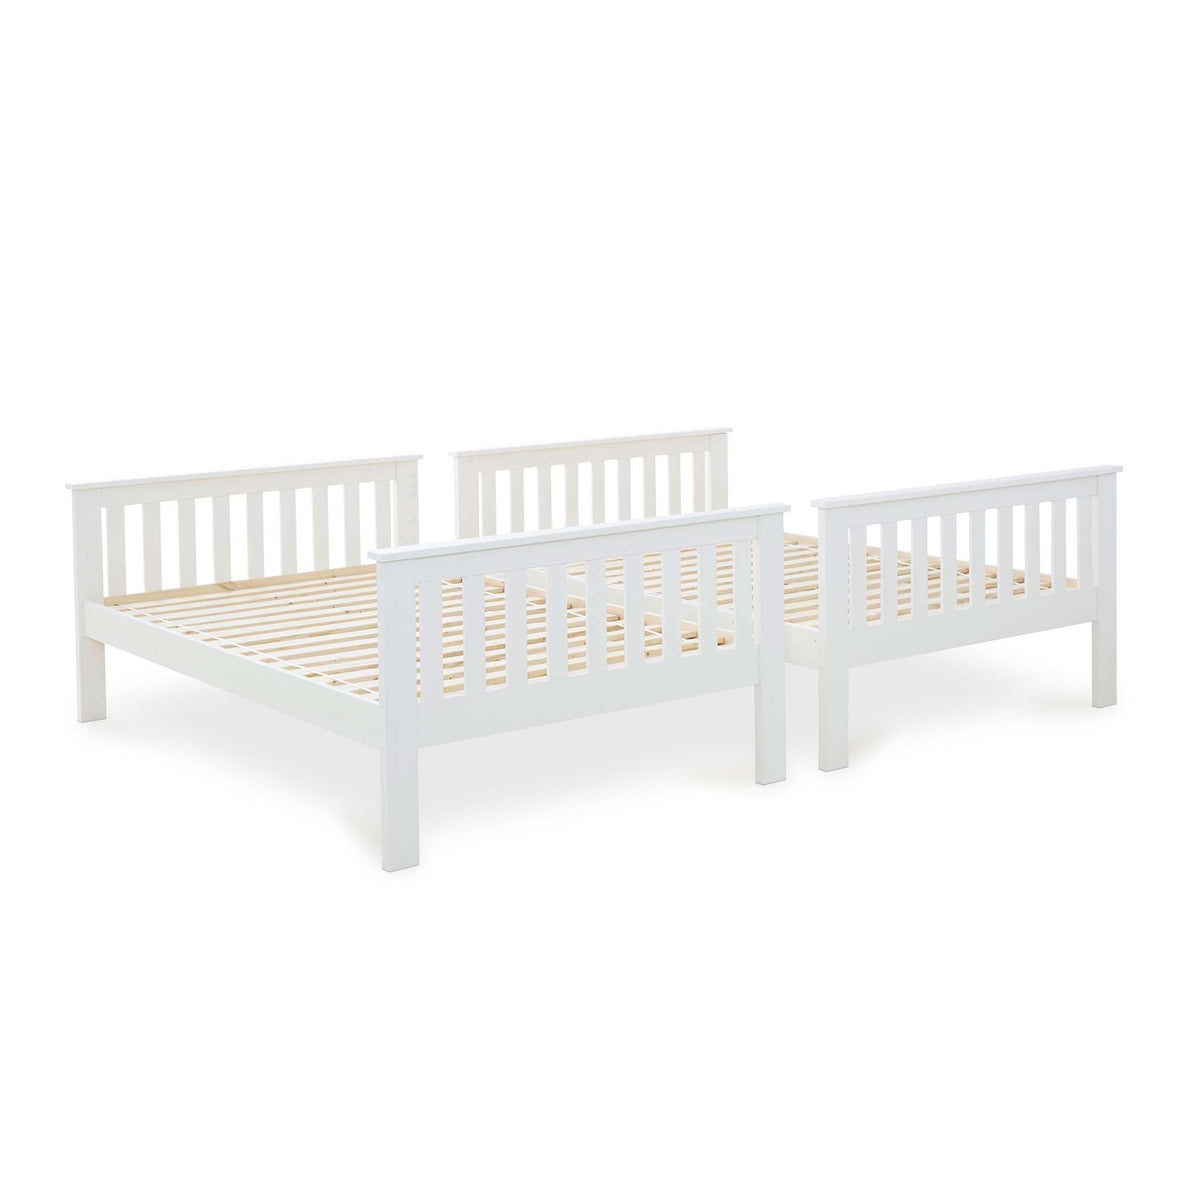 Detached small double beds from the Quad 4 Sleeper Bunk Bed